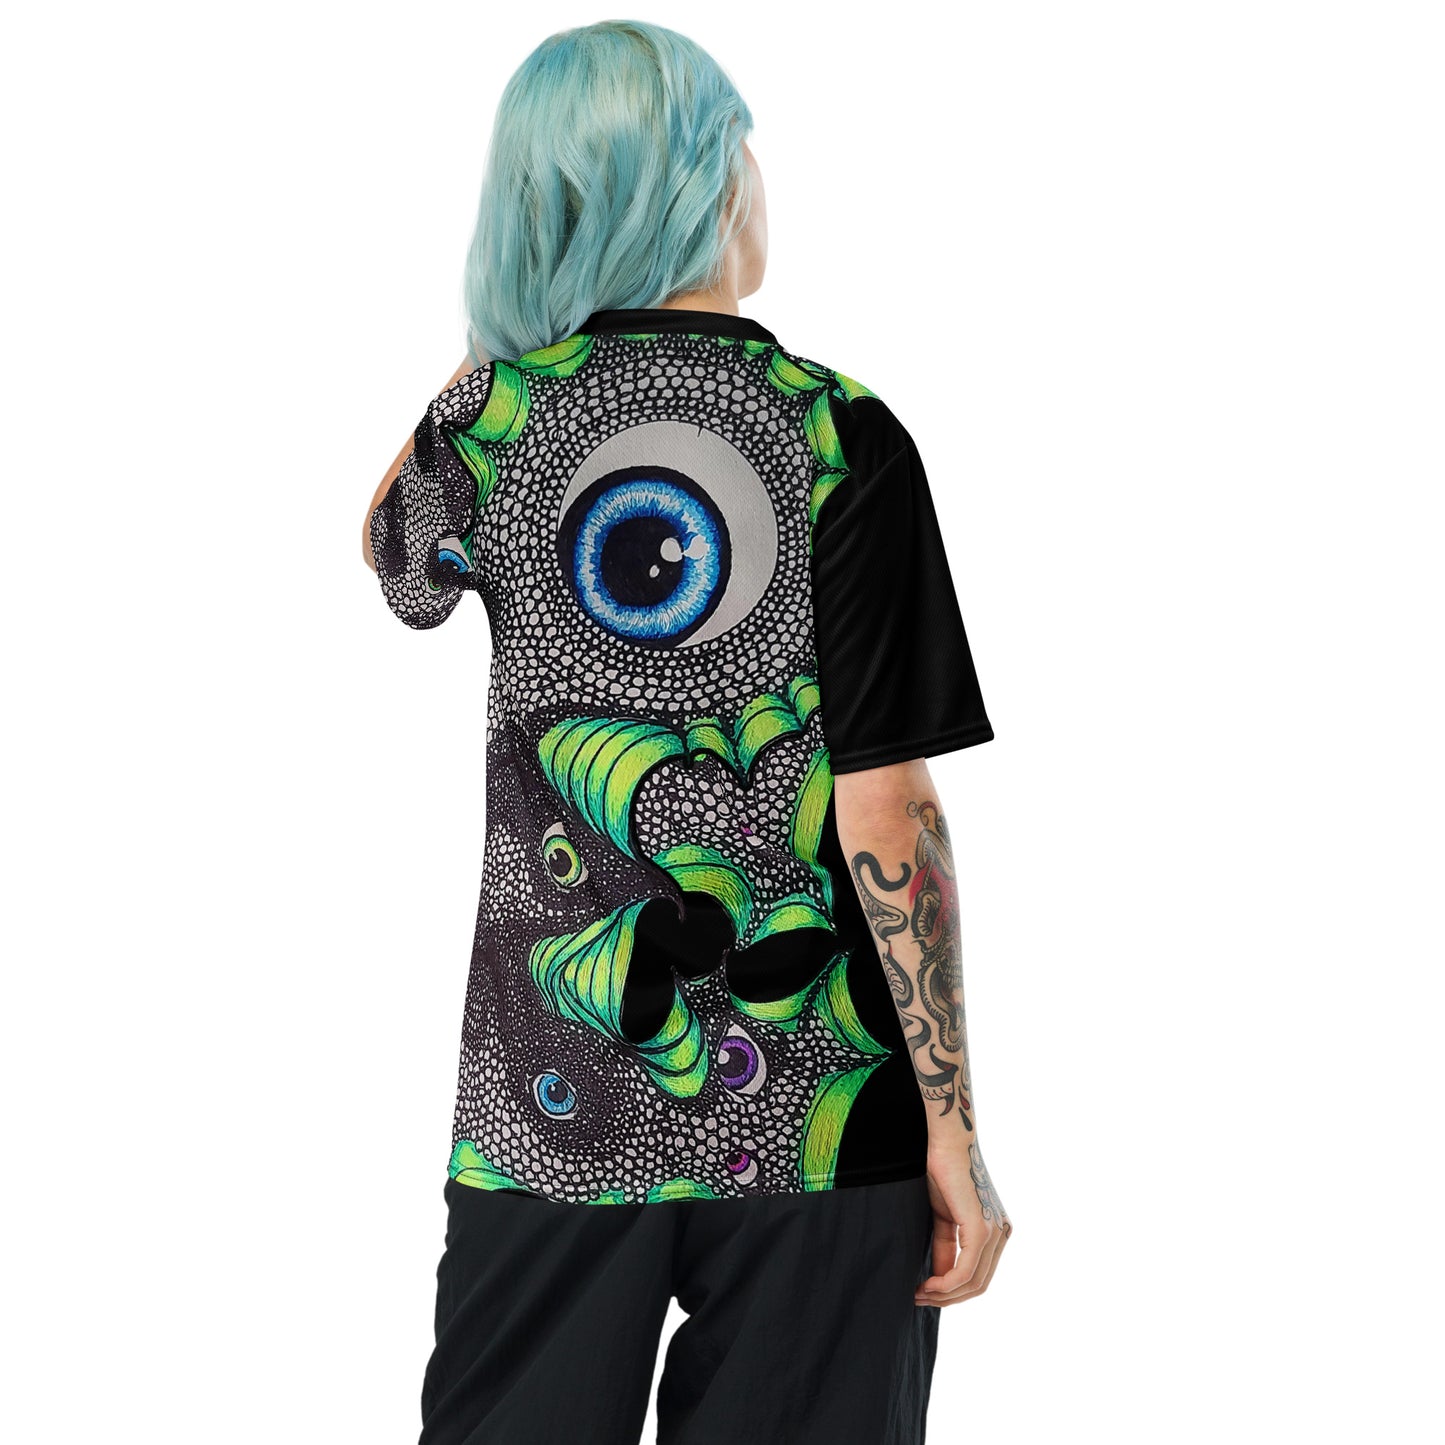 The Eyes Have It Recycled unisex sports jersey